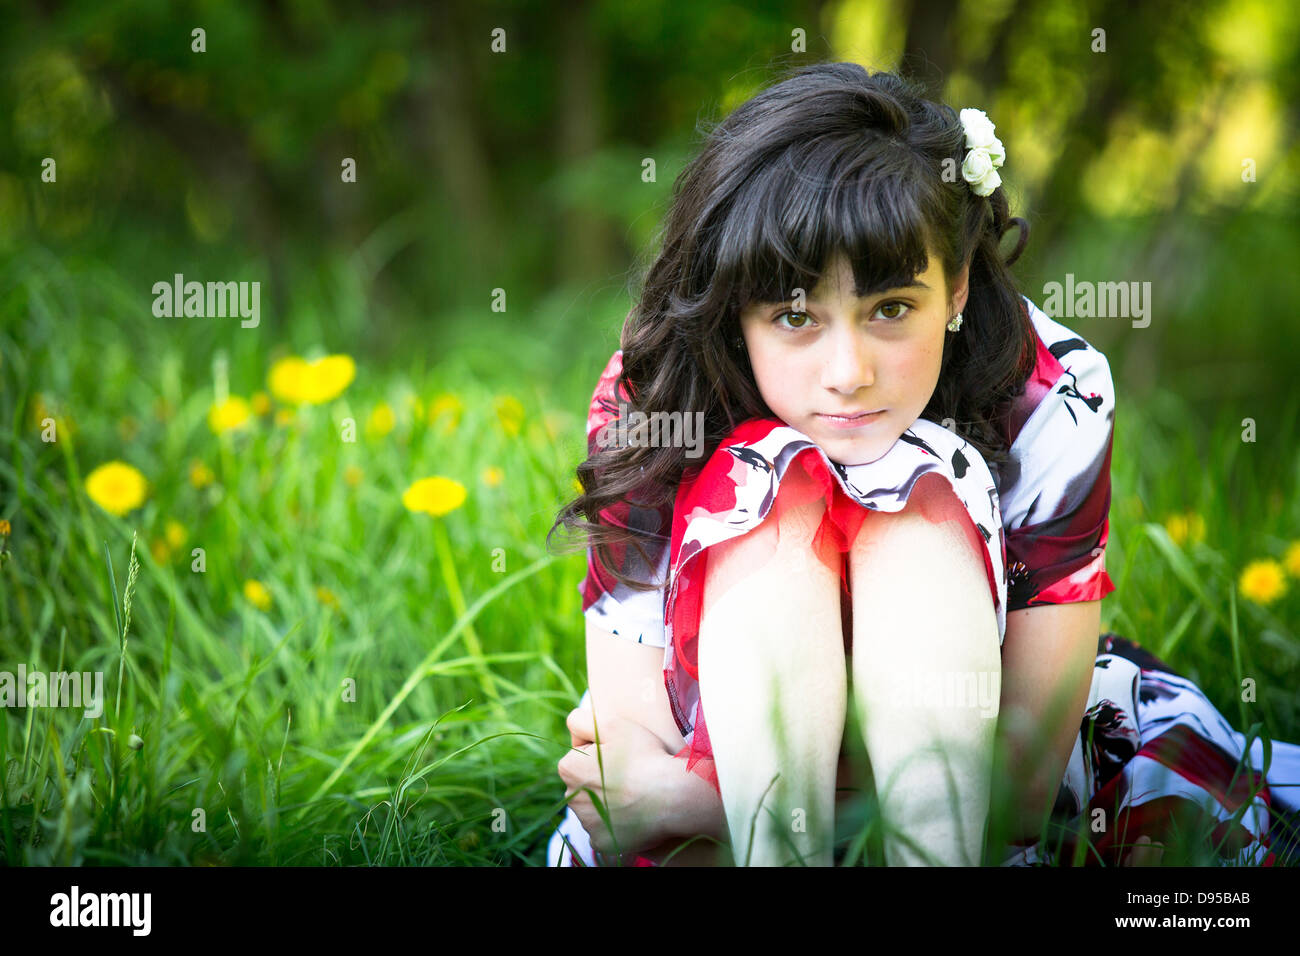 Portrait of a teen girl sitting in the grass Stock Photo